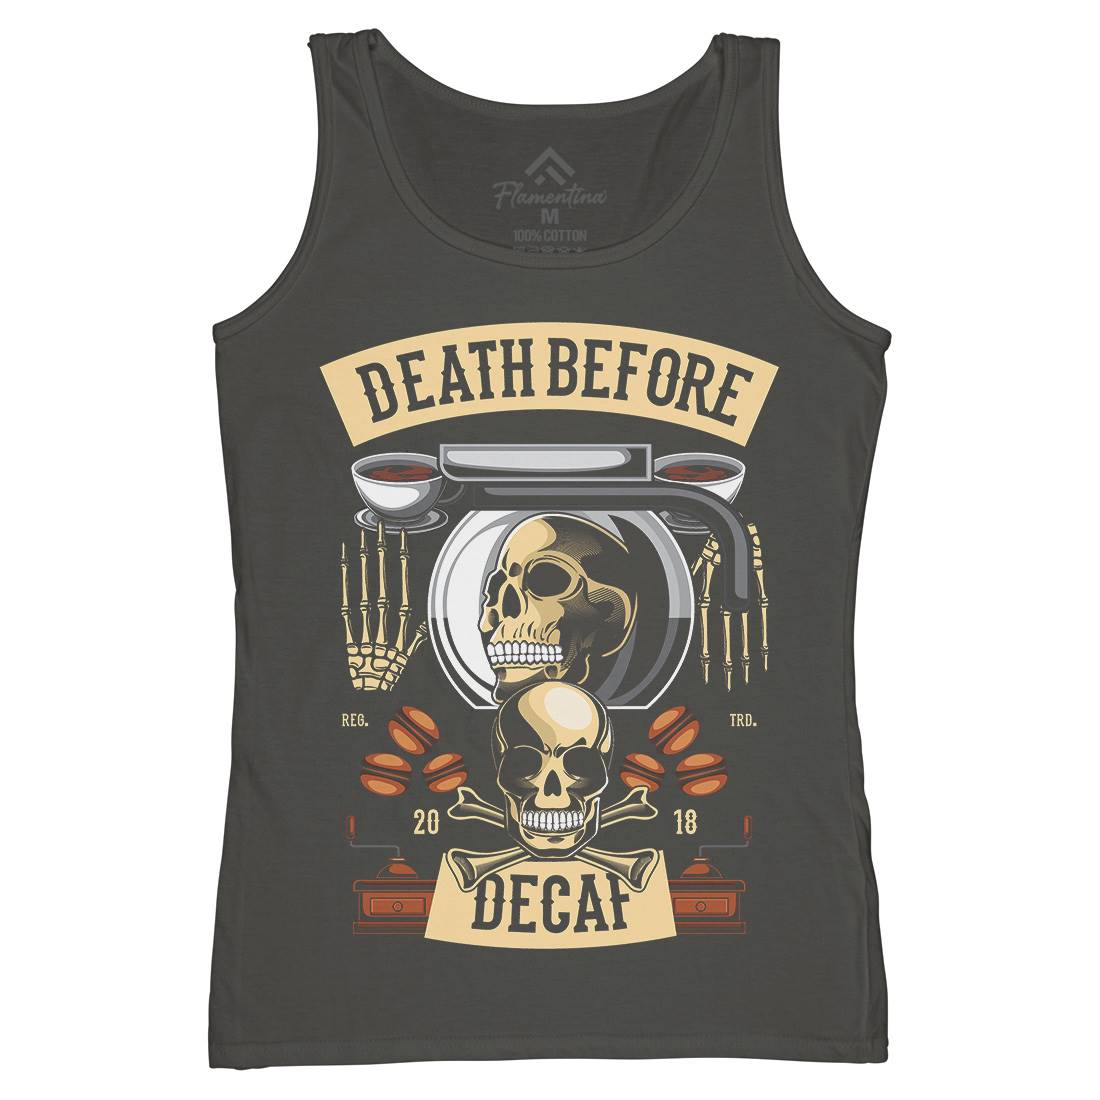 Death Before Decaf Womens Organic Tank Top Vest Drinks C335